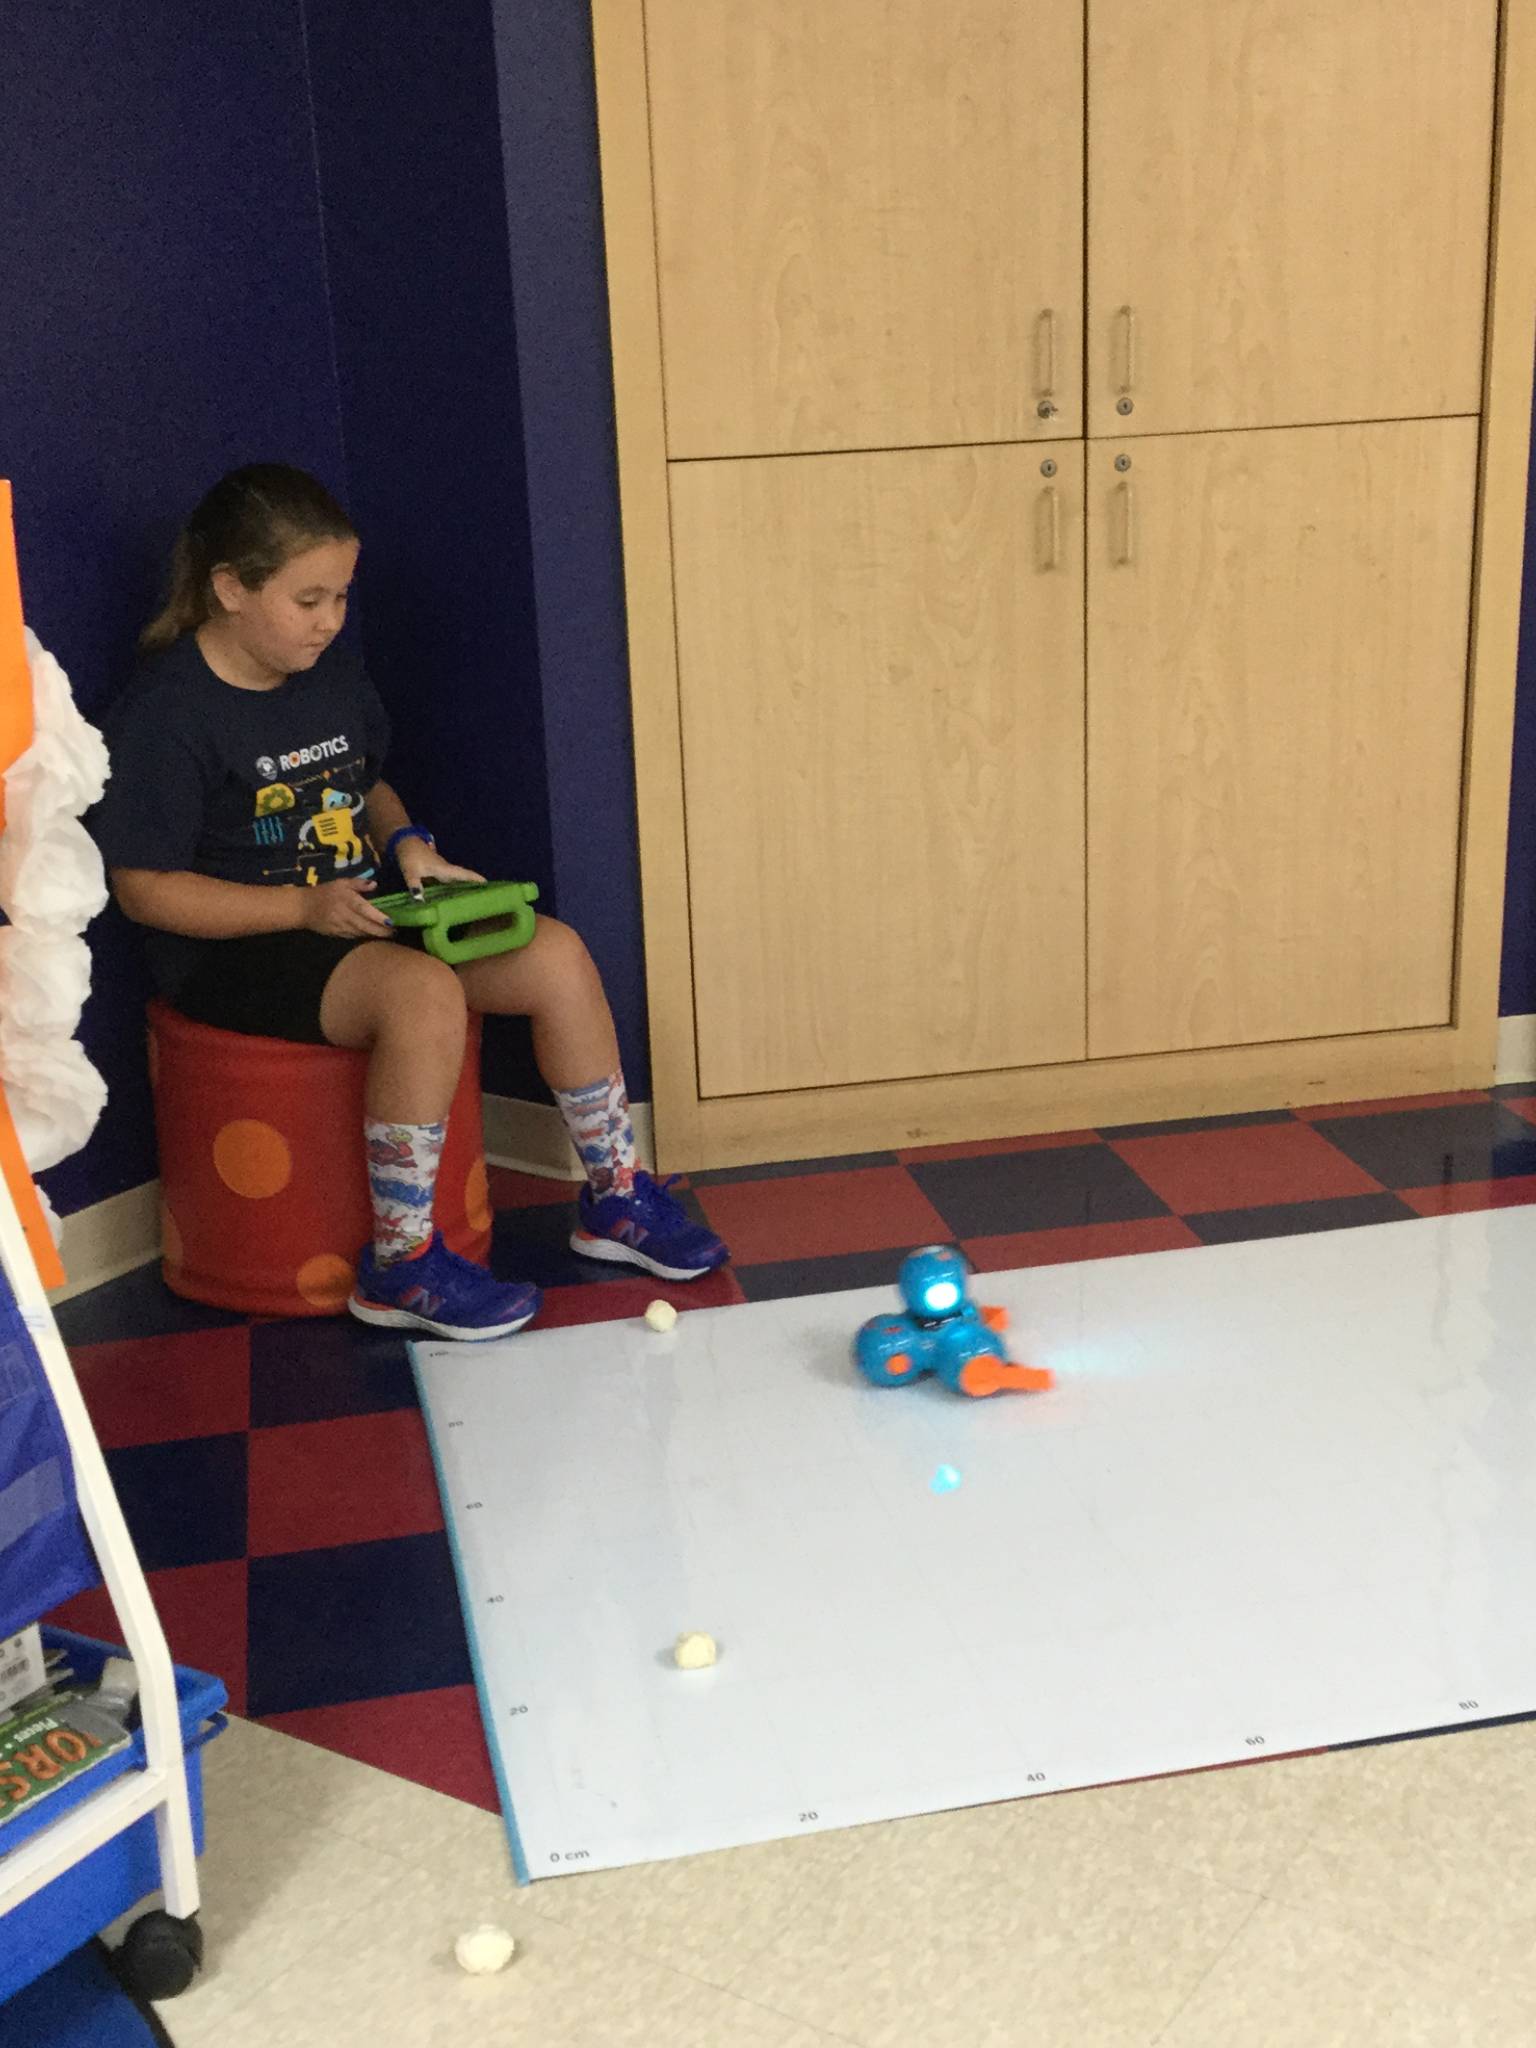 Children further STEM-based learning by interacting with a programmable robot named Dash as part of the two-week Primrose Schools robotics curriculum.